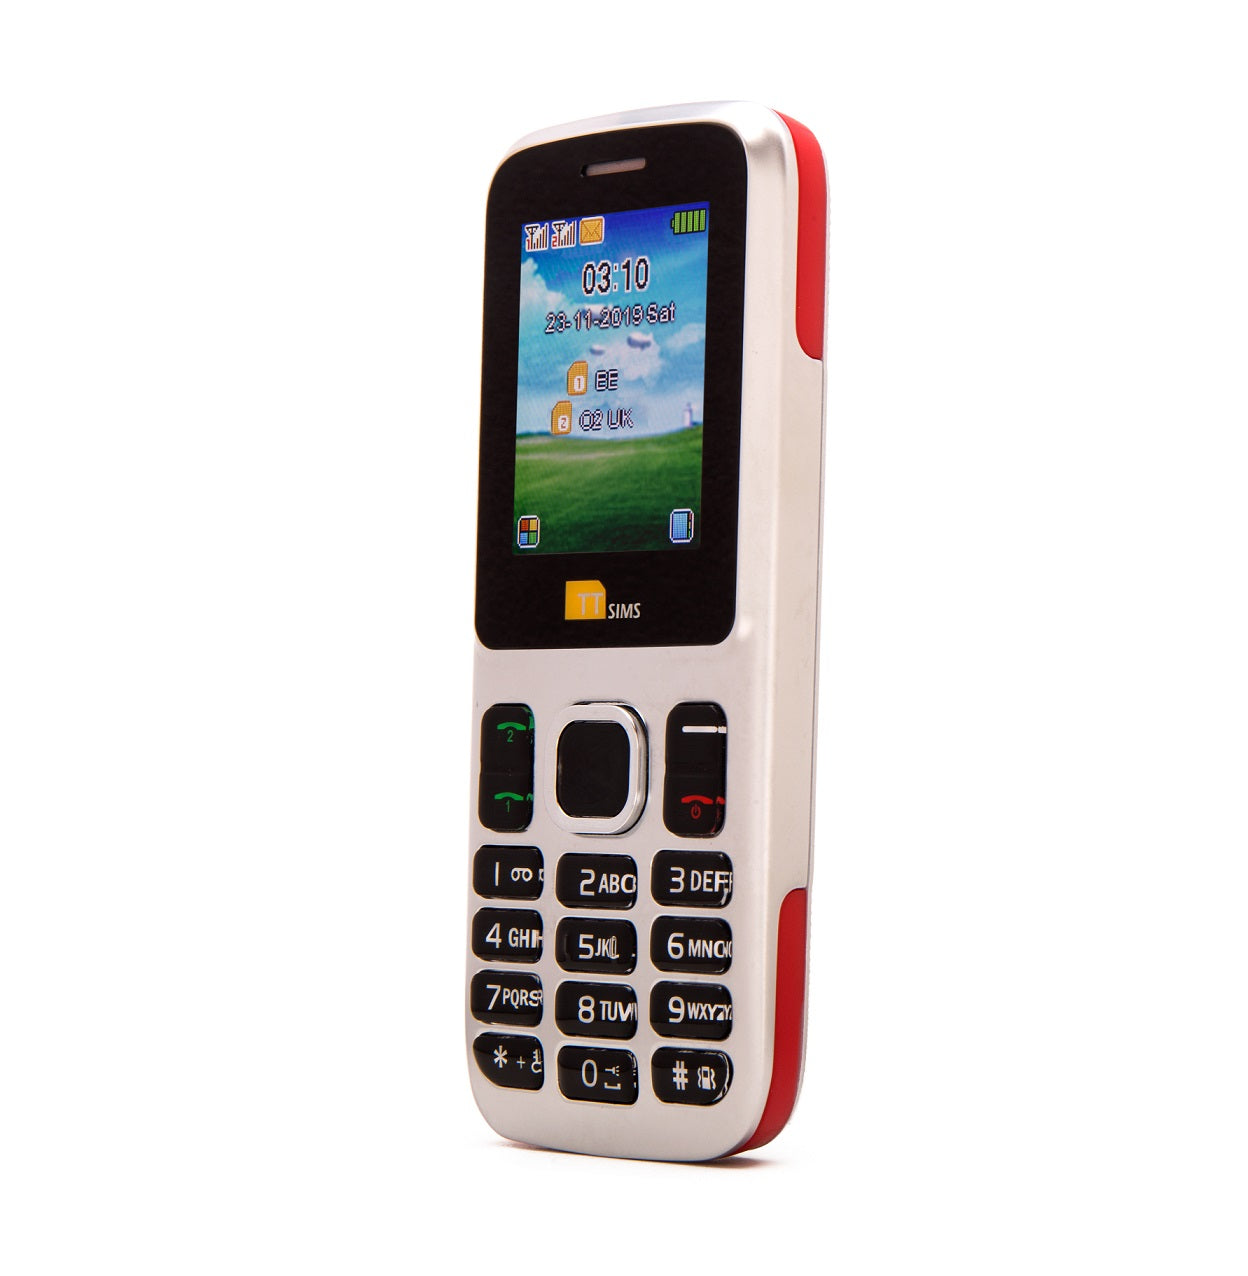 TTfone Red TT130 Dual Sim - Warehouse Deals with Mains Charger and EE Pay As You Go